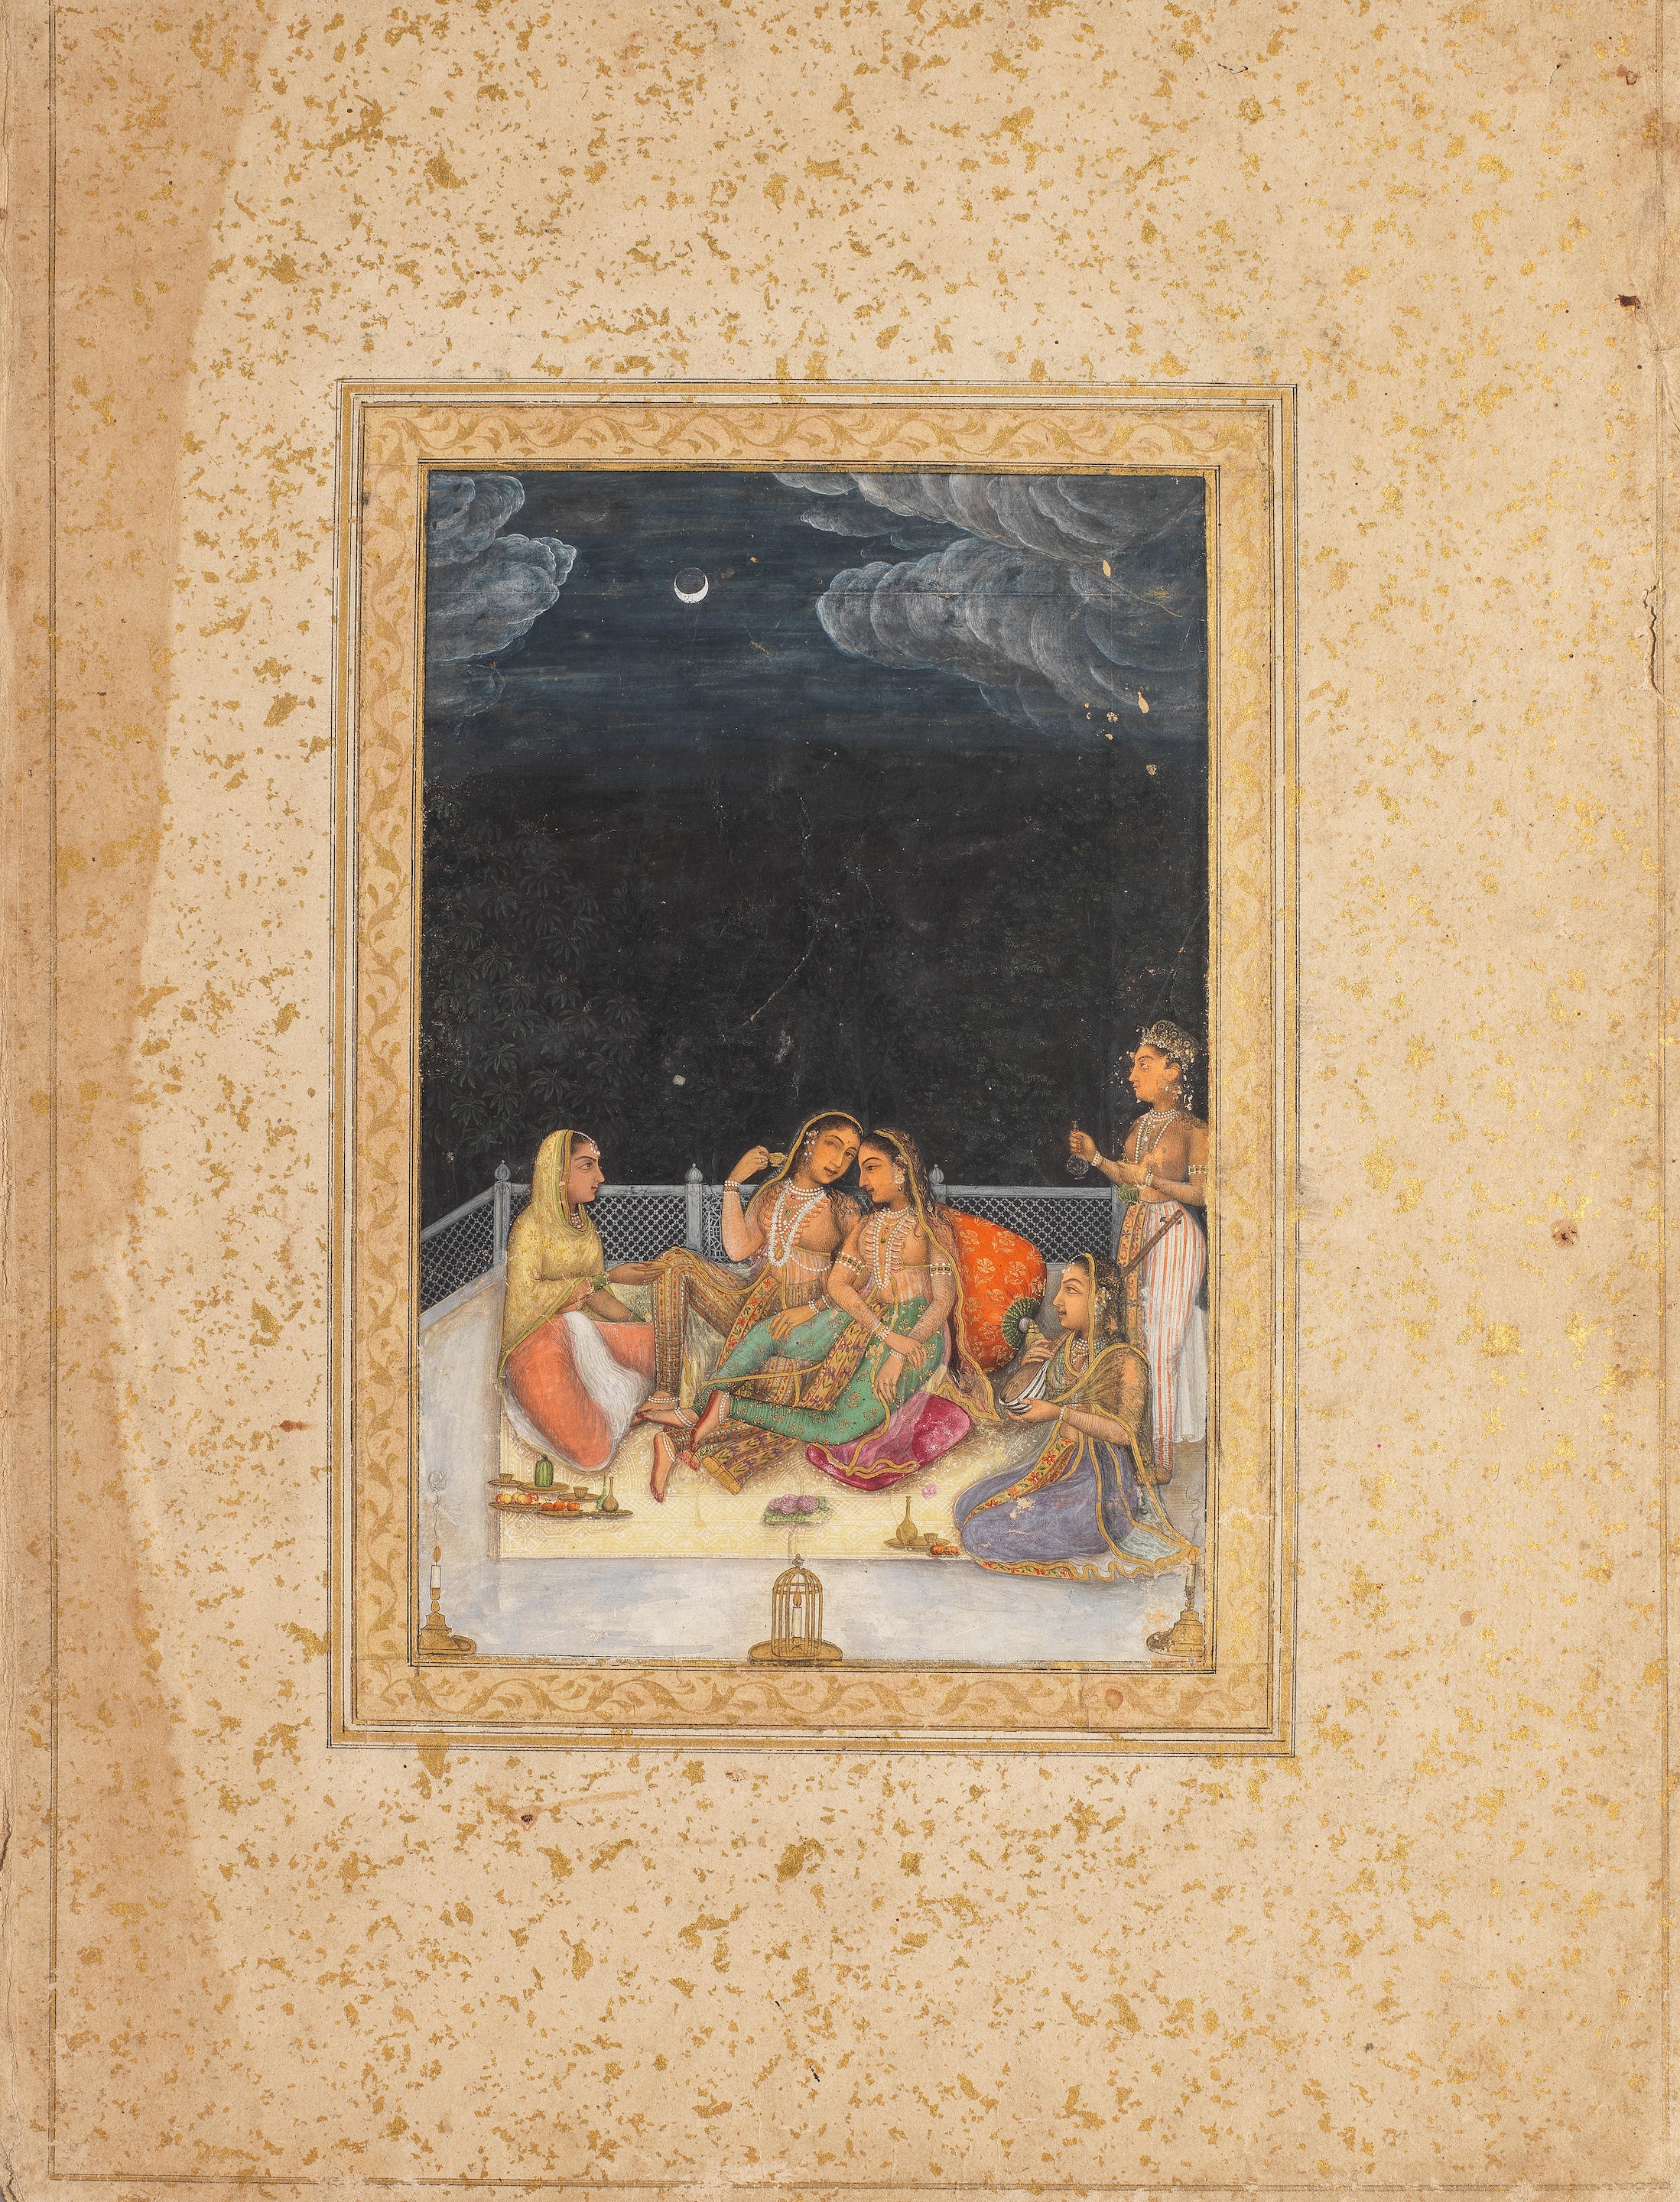 Maidens at a moonlit party with musicians and attendants by Mughal School, 18th Century, circa 1760-80